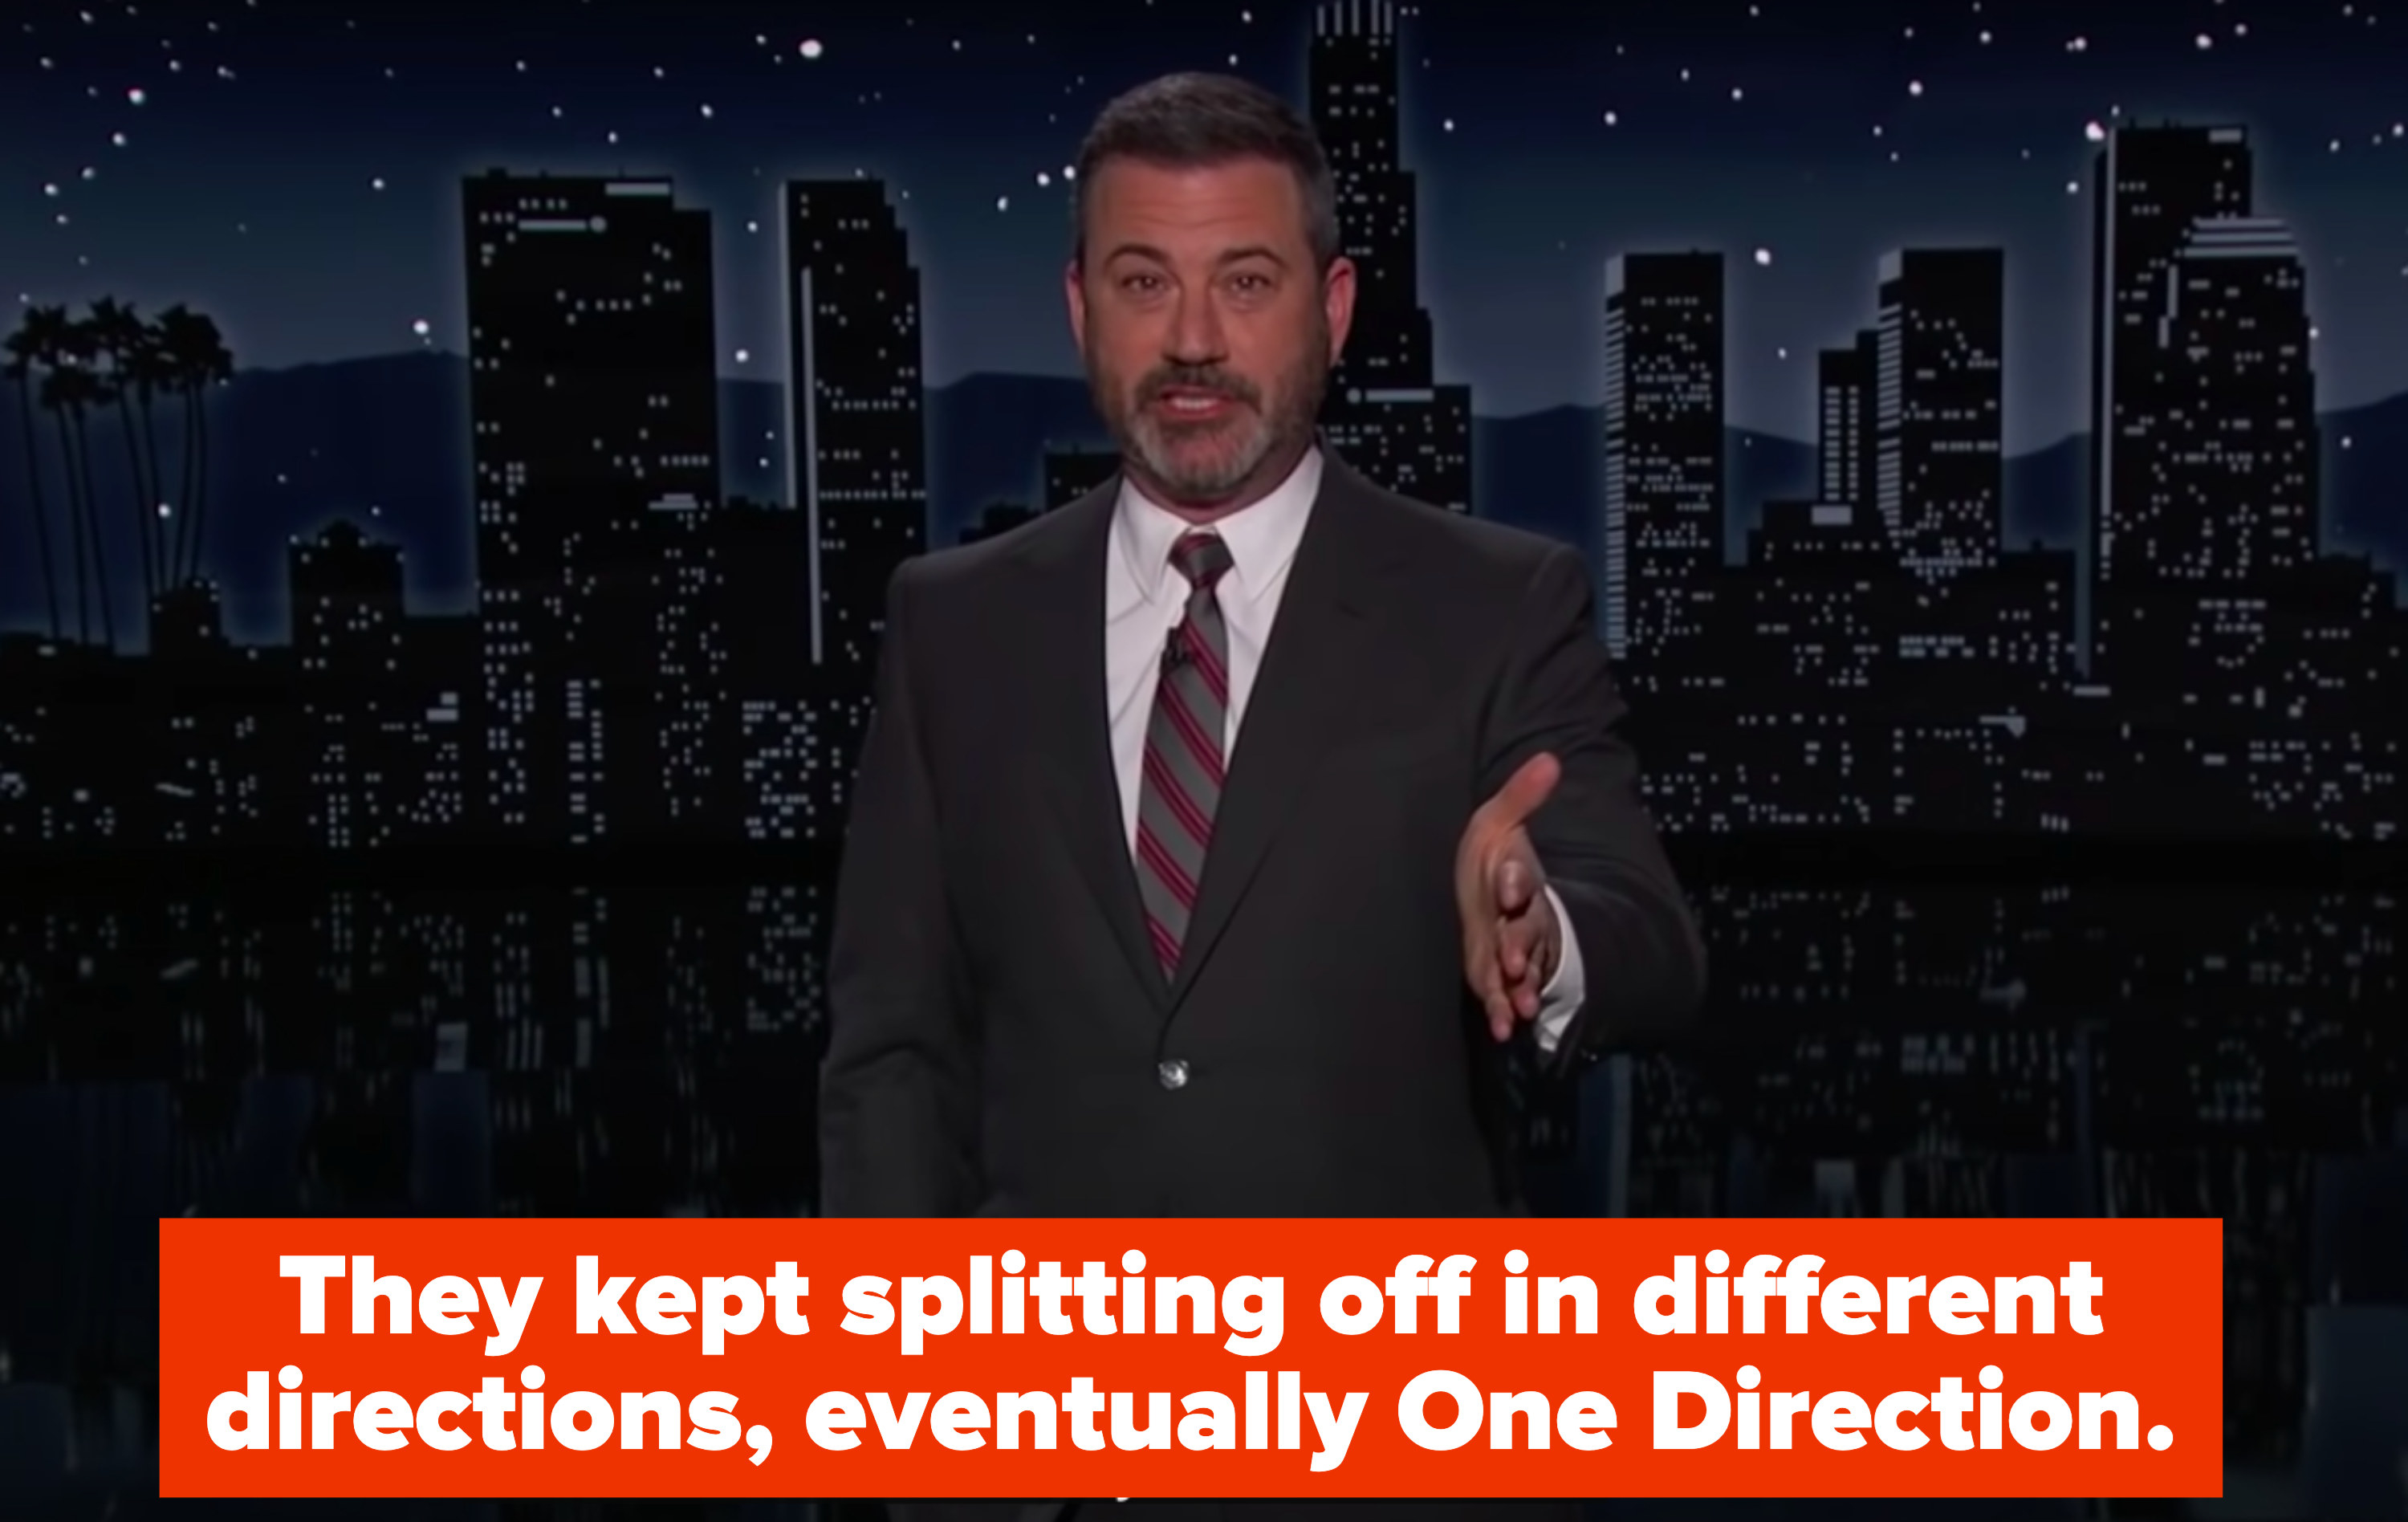 Jimmy saying &quot;They kept splitting off in different directions, eventually One Direction&quot;